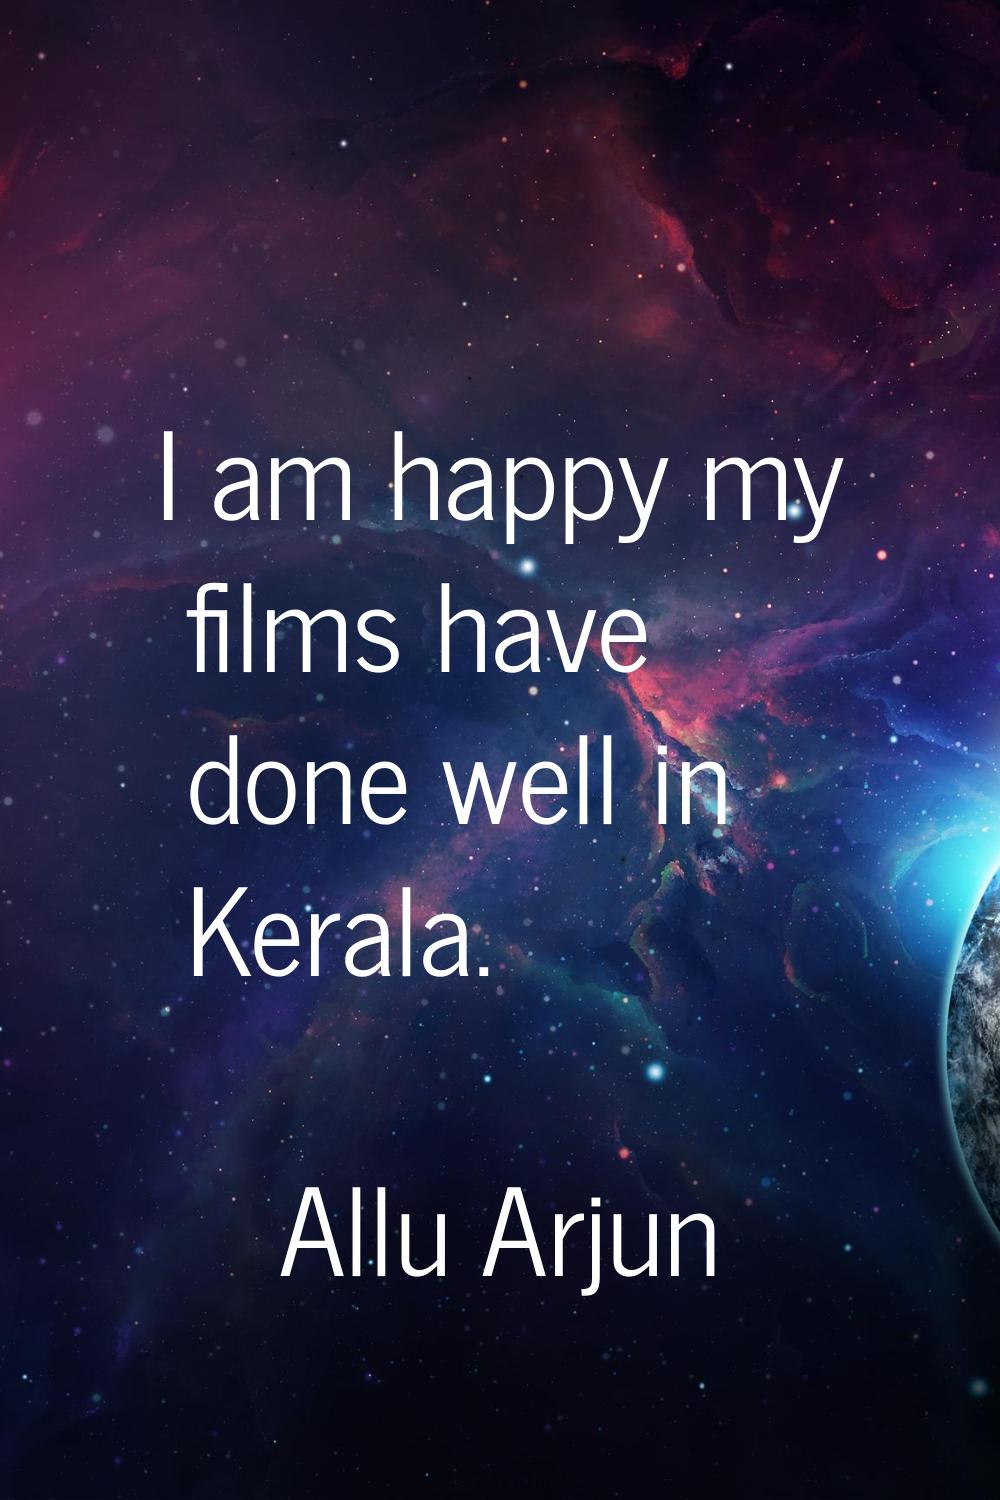 I am happy my films have done well in Kerala.